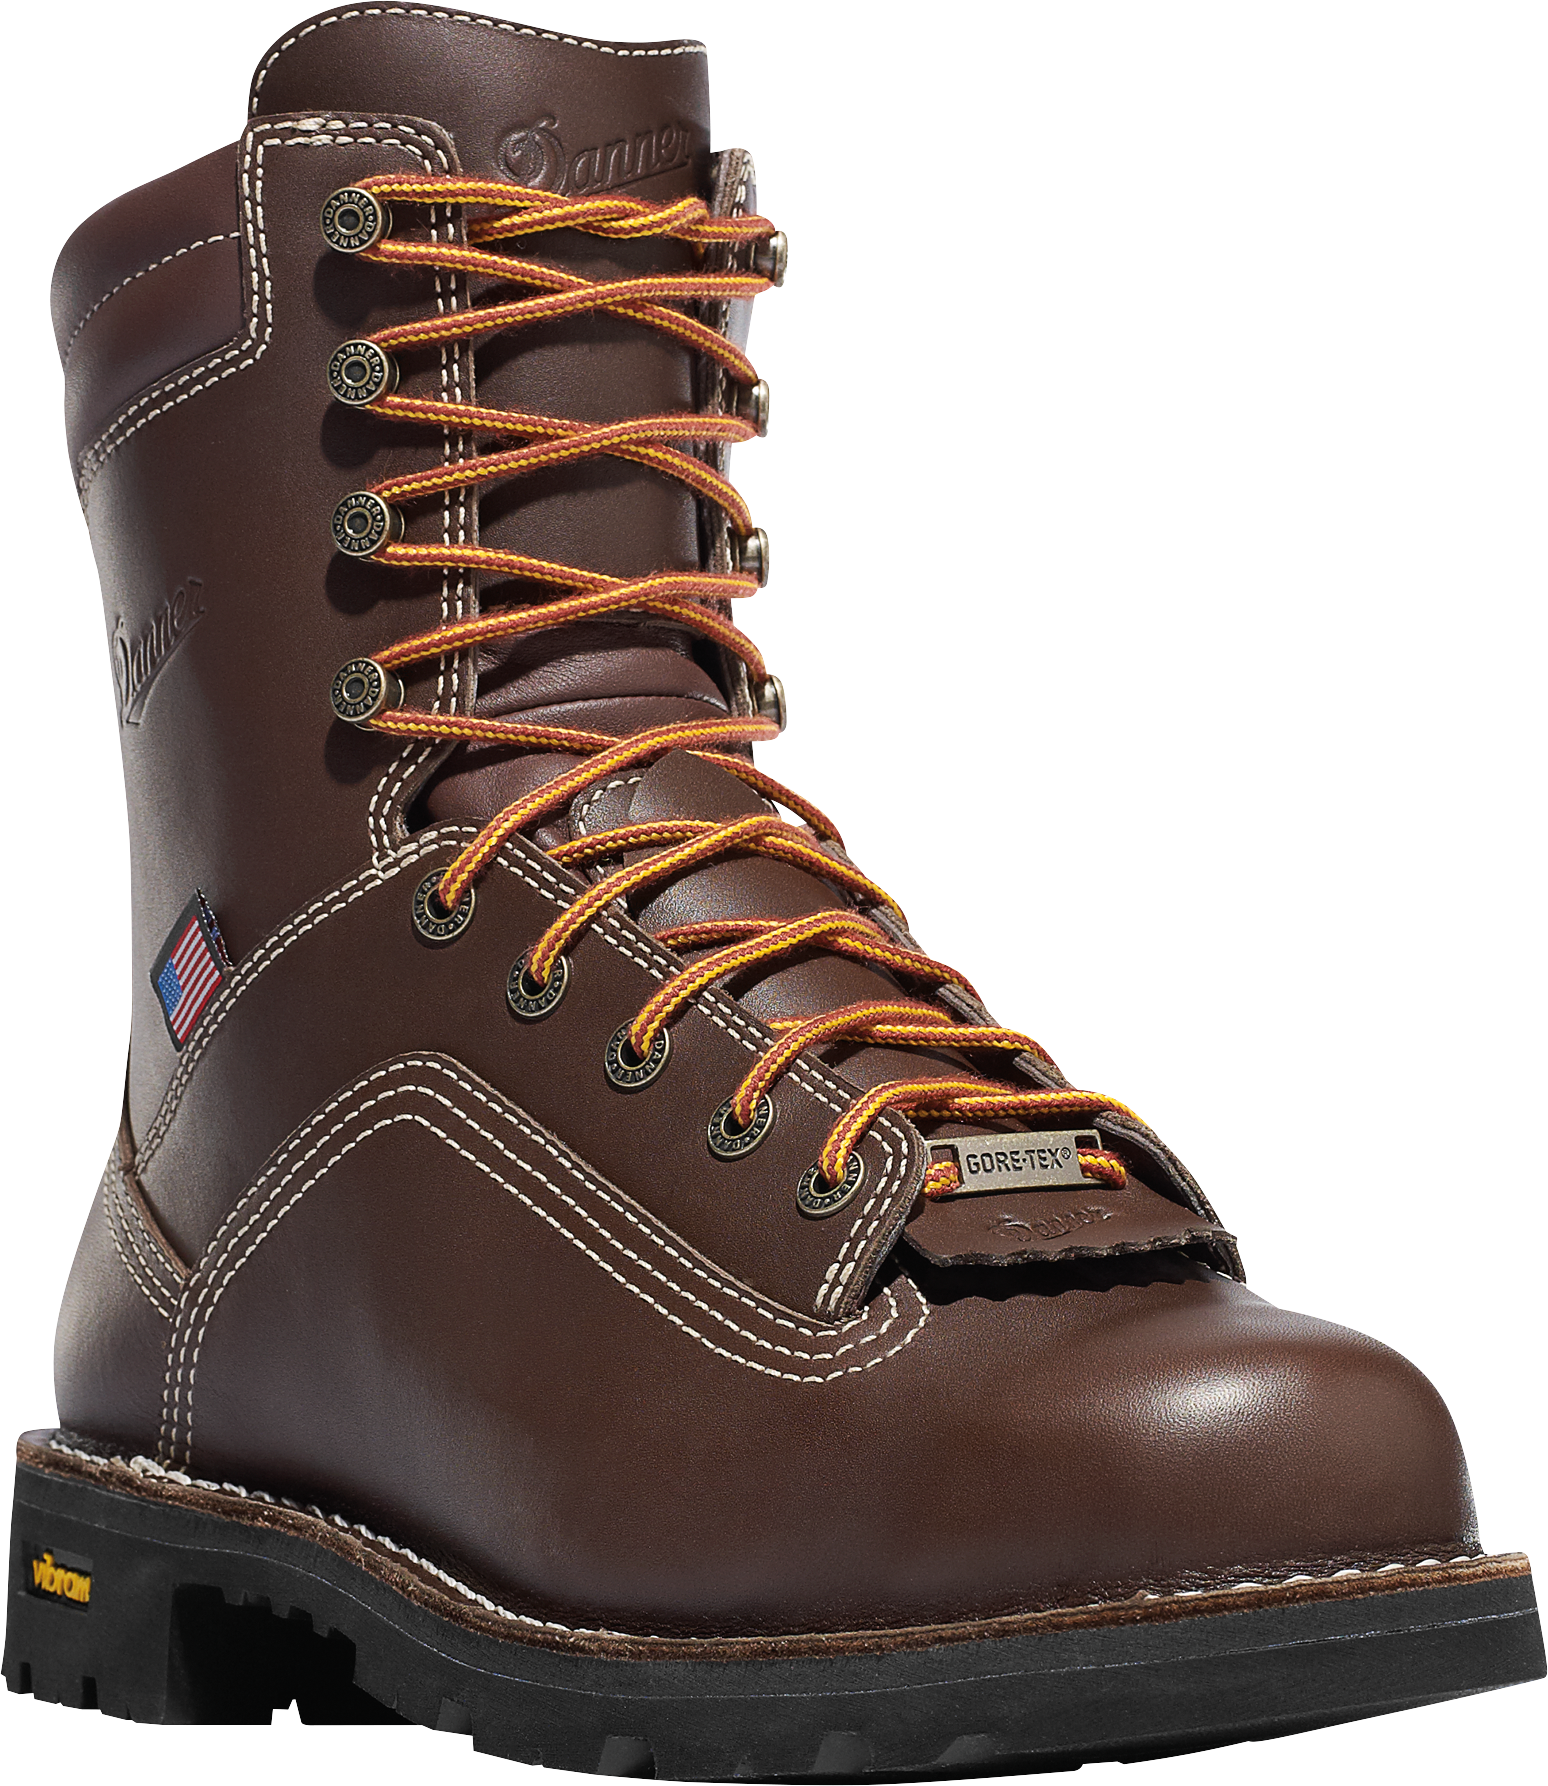 Danner Quarry USA Brown GORE-TEX Alloy Toe Work Boots for Men - Brown - 11M